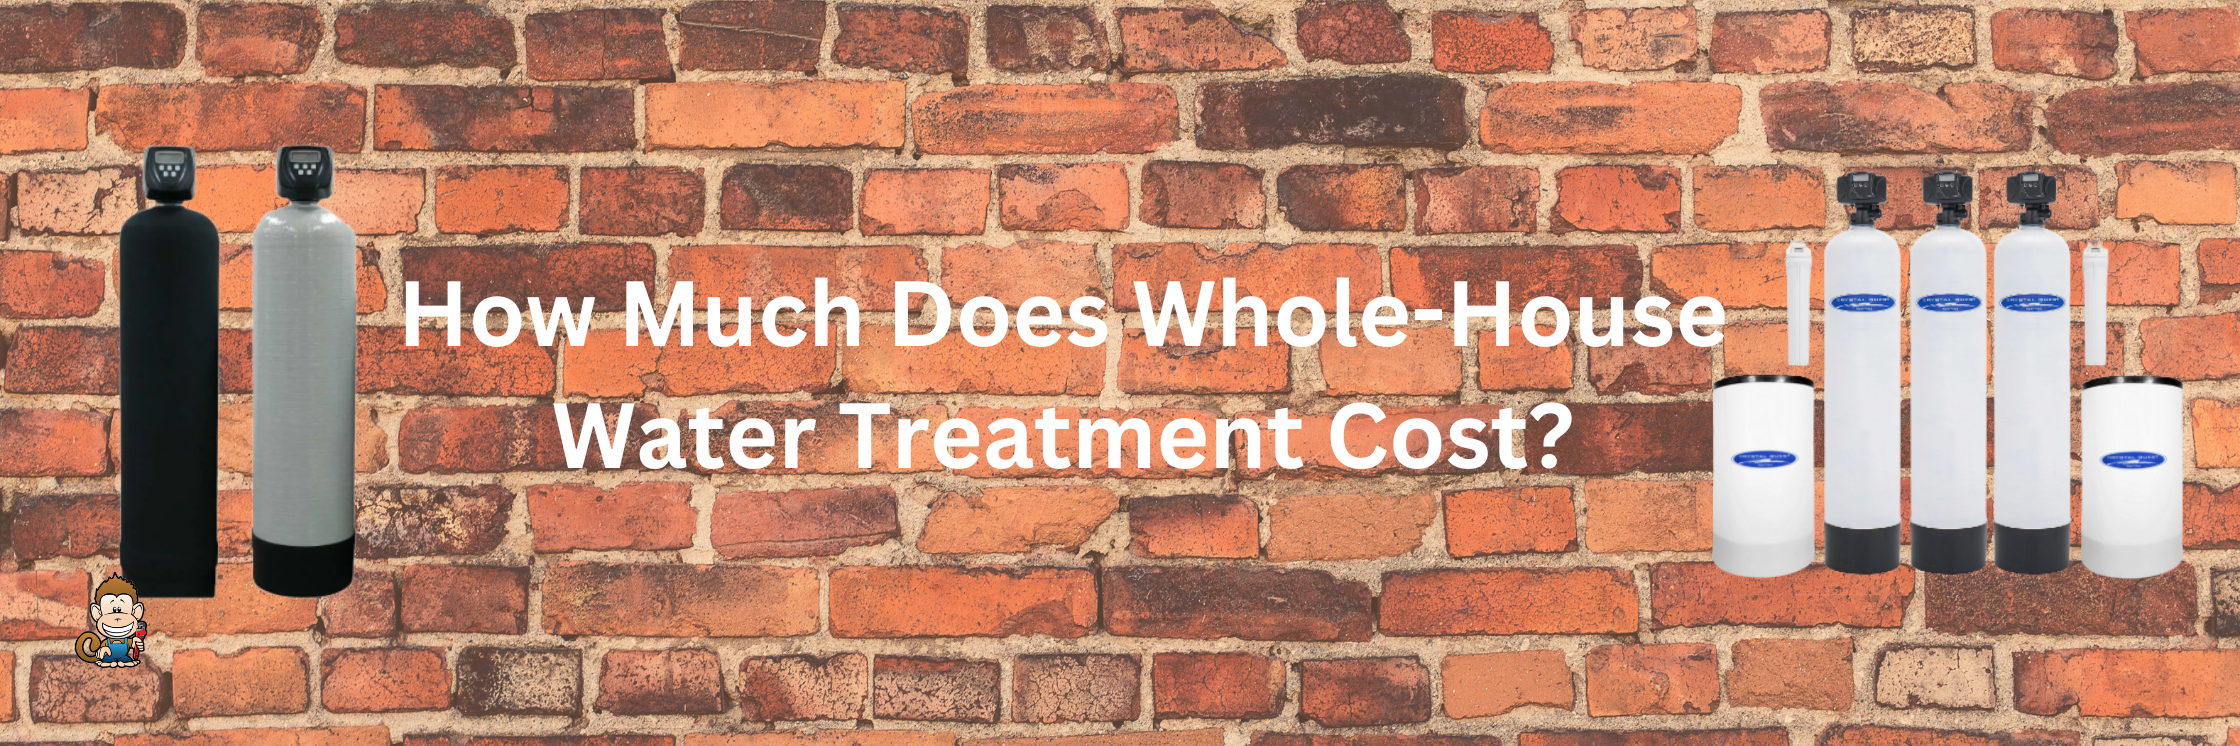 How Much Does Whole-House Water Treatment Cost?